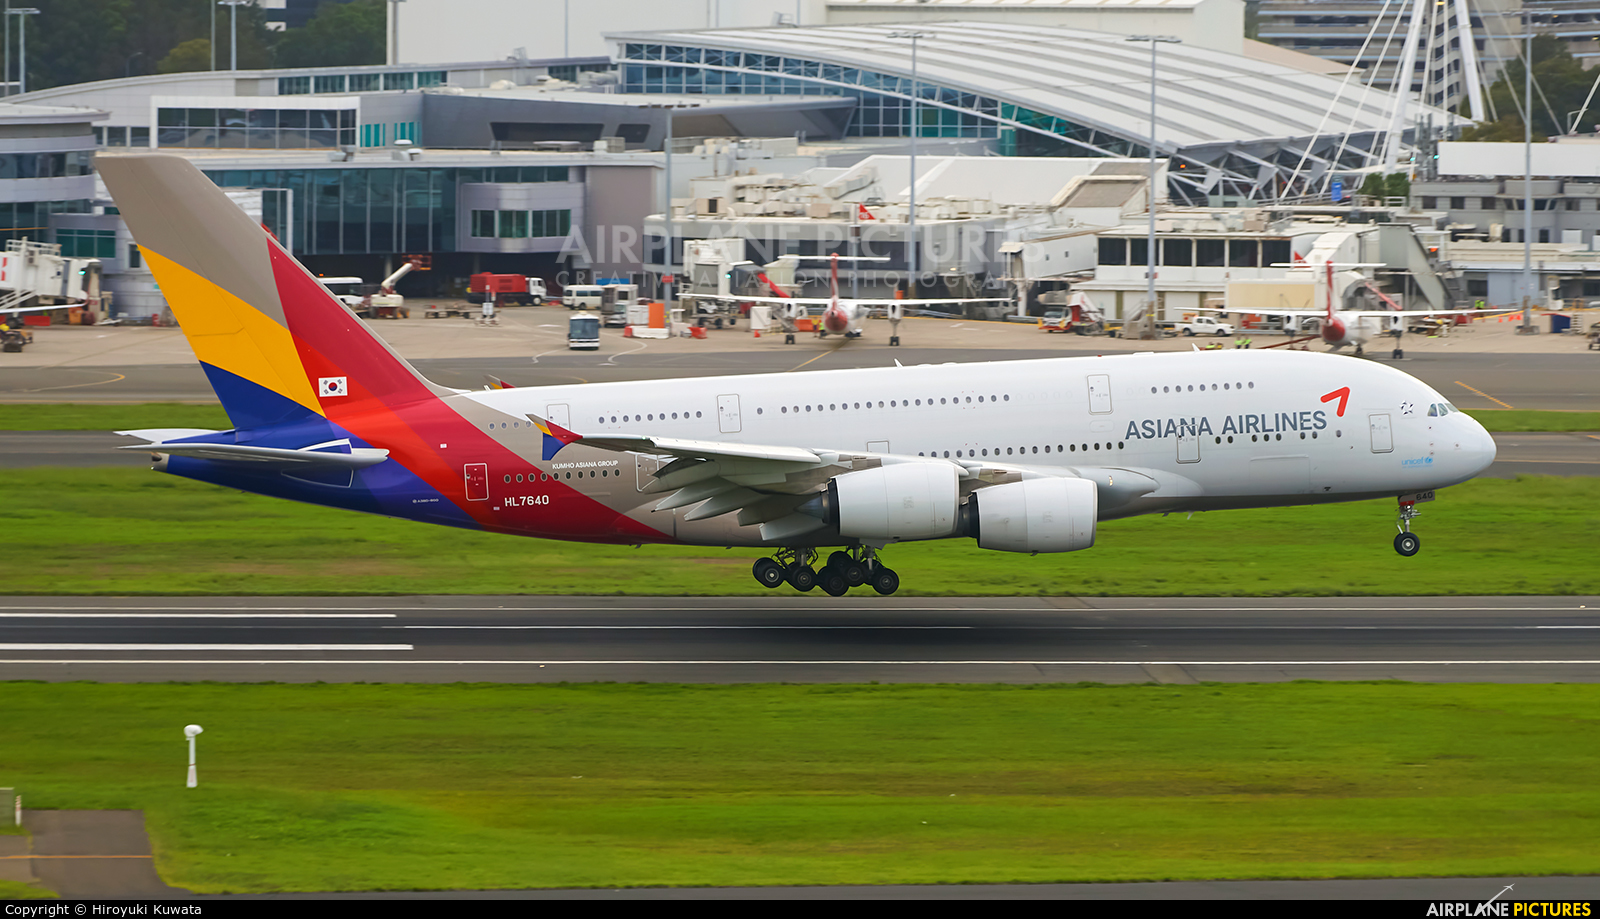 Asiana Airlines HL7640 aircraft at Sydney - Kingsford Smith Intl, NSW